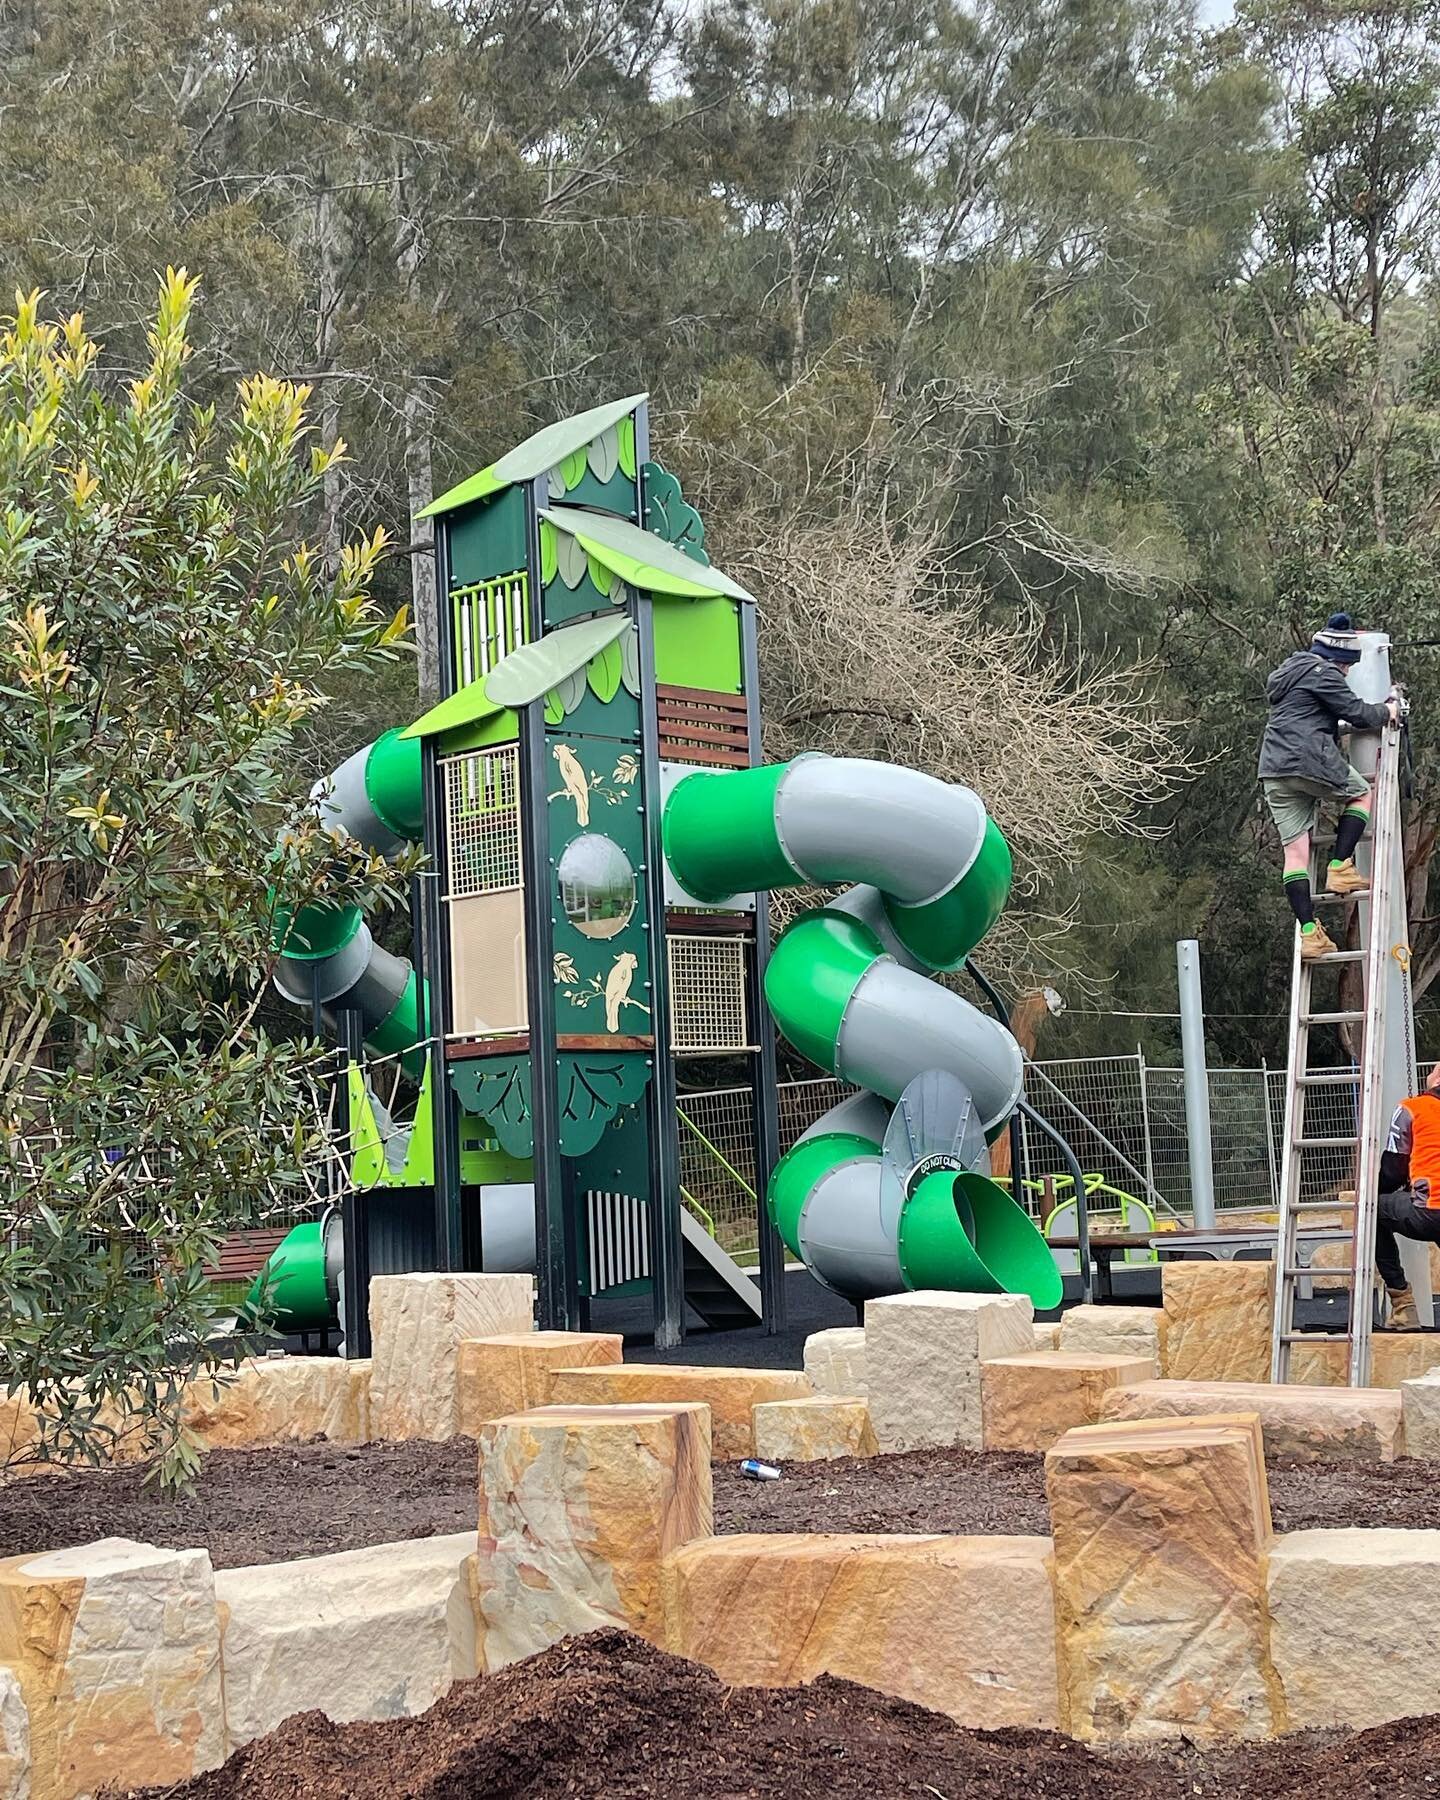 *update* This project is coming together so nicely. The sandstone log work is just stunning and just quitely we all want to have a go on that slide !! 🙌 #playgroundgoals 
The concrete work on this job is also bang on. We cannot wait to open this pla